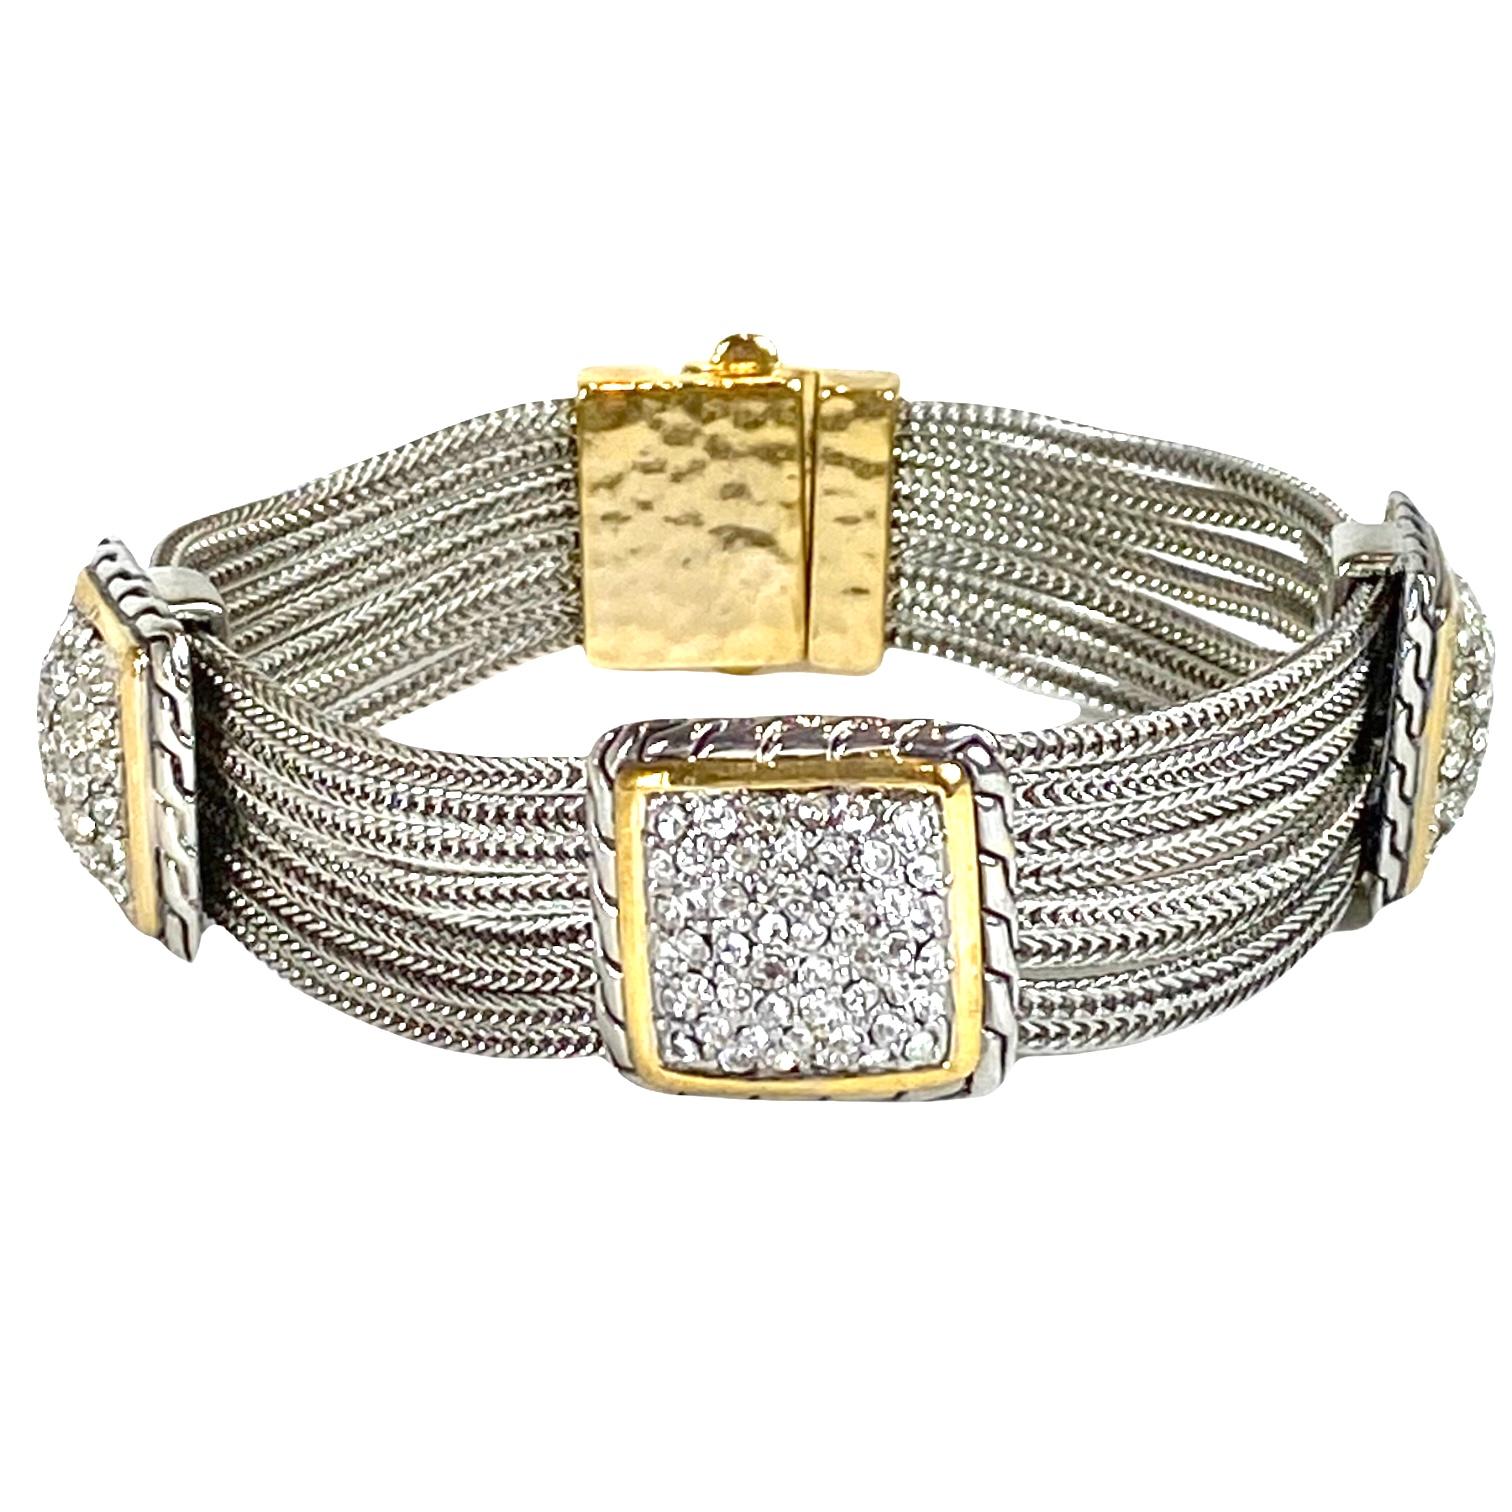 Women's Silver and gold mesh bracelet w/ square rhinestone stations